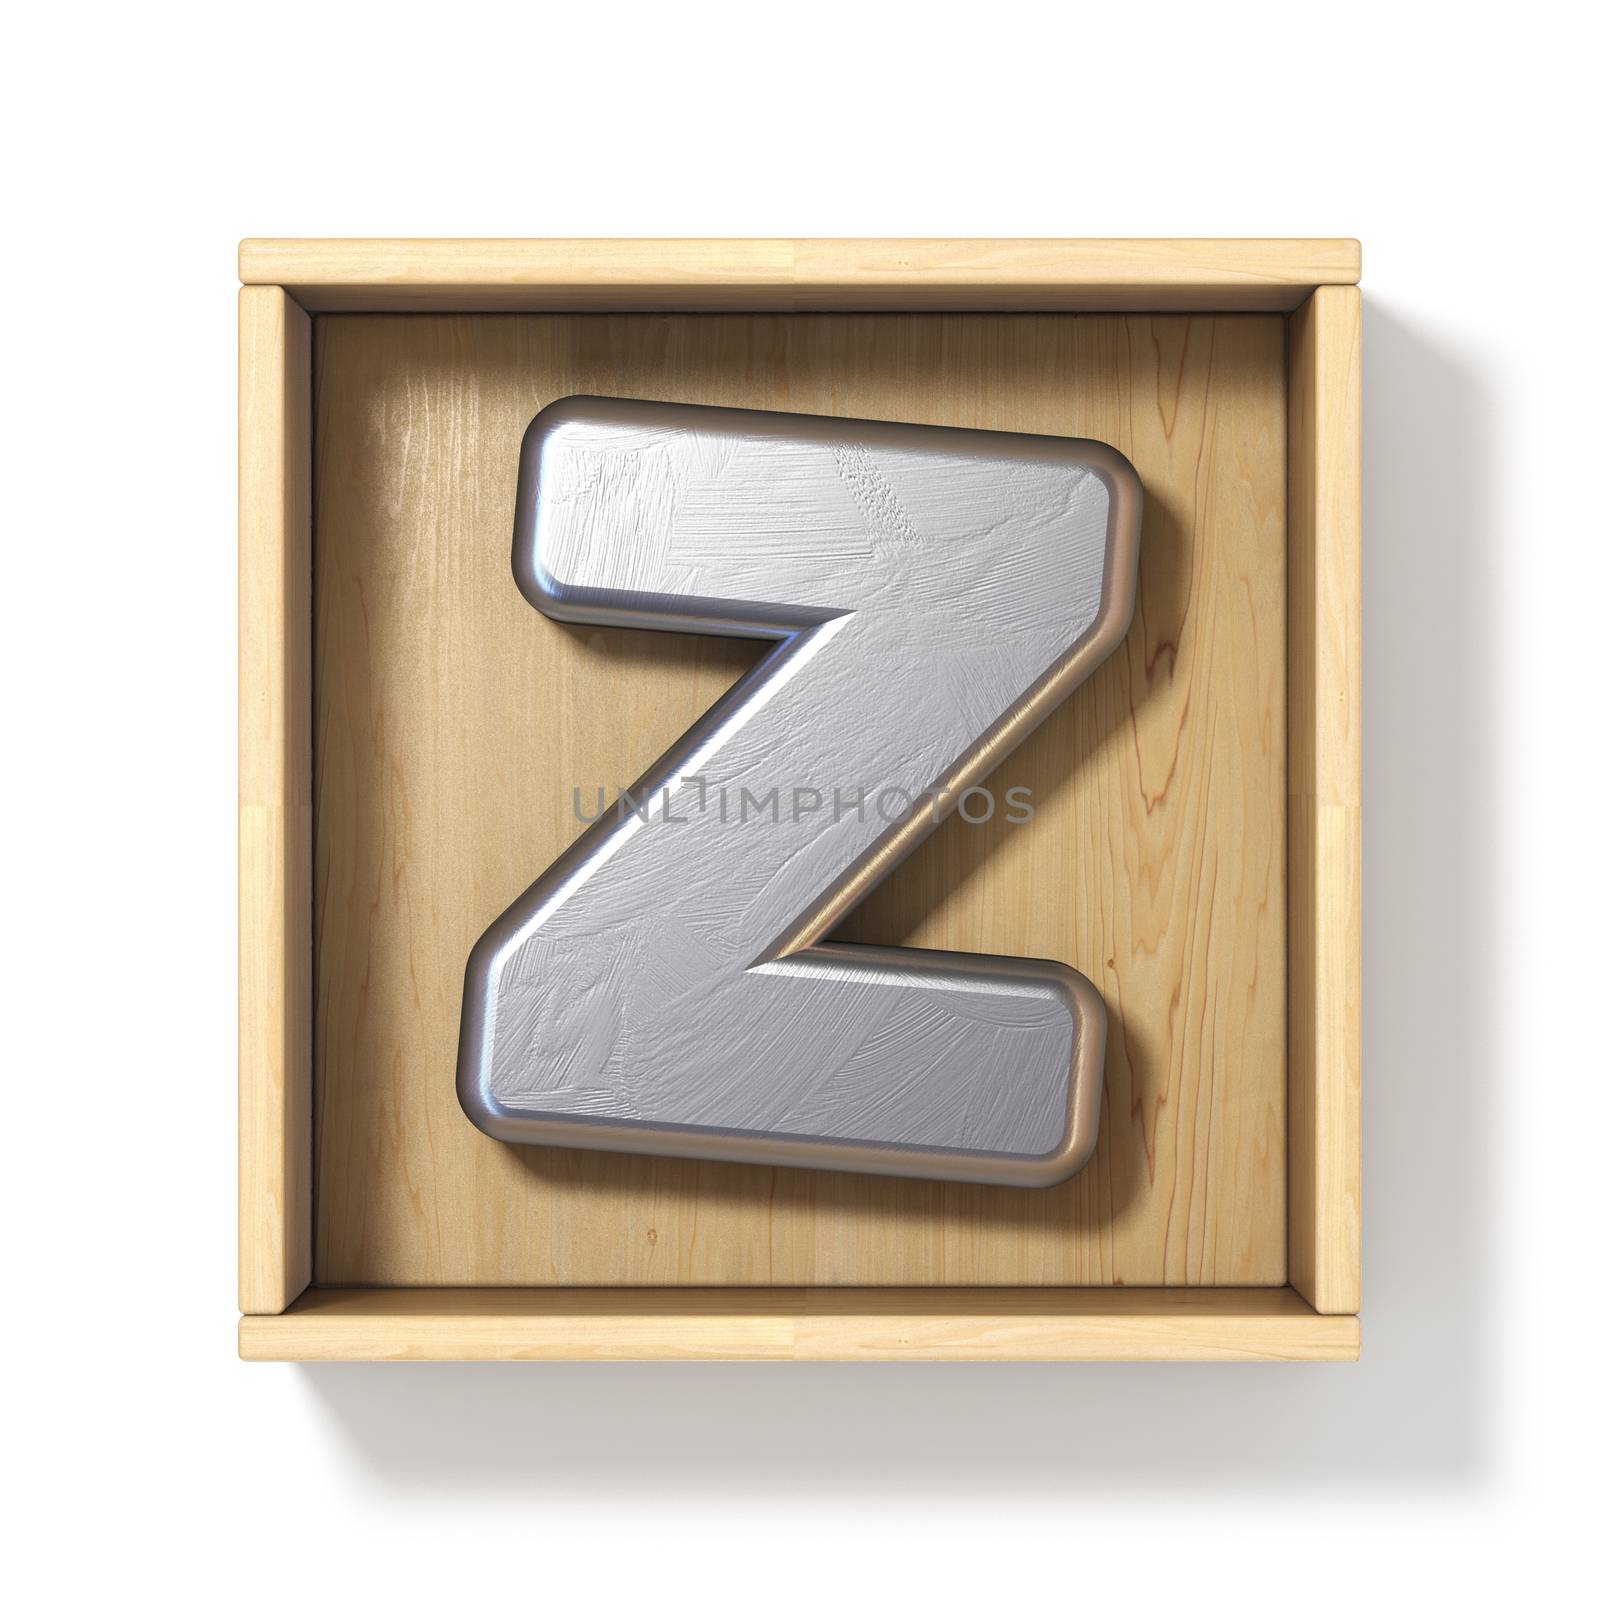 Silver metal letter Z in wooden box 3D render illustration isolated on white background